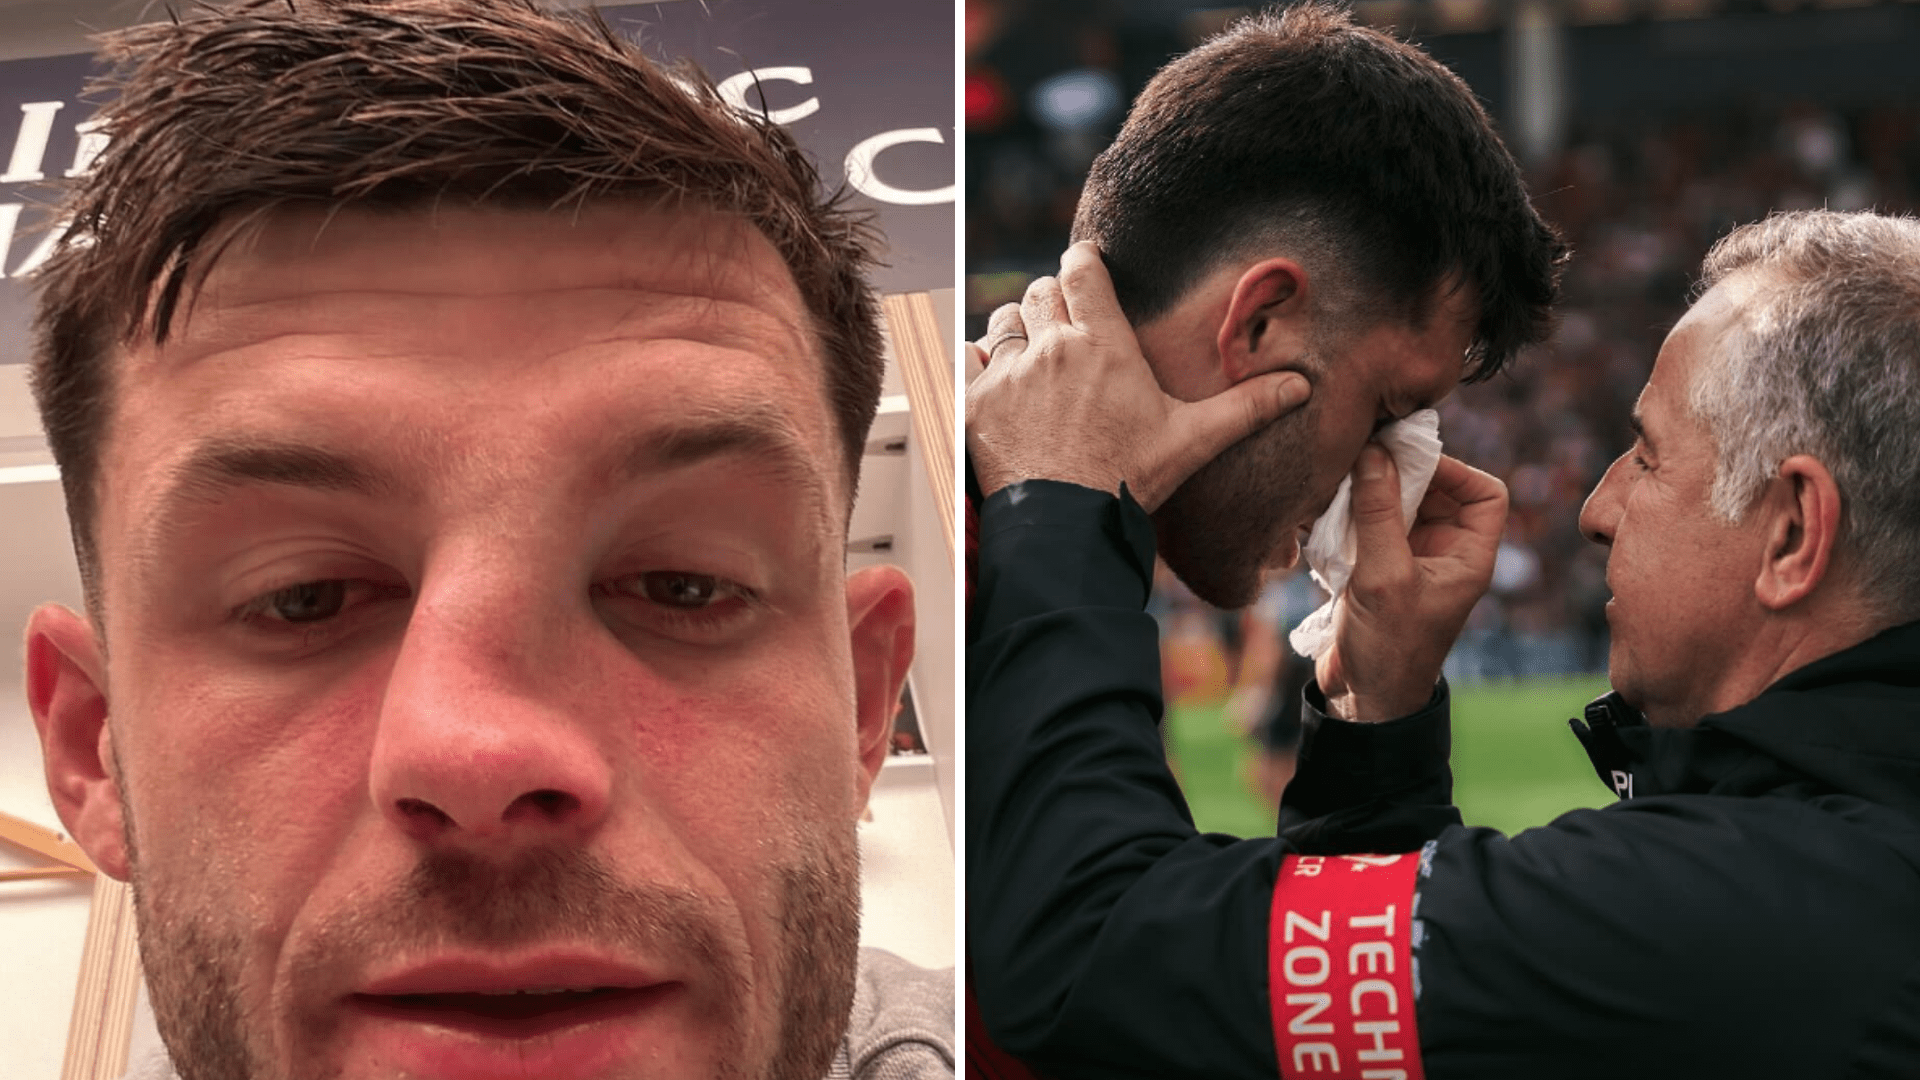 Scotland rugby star shares gruesome images of horror facial injury that stopped him from celebrating dramatic win [Video]